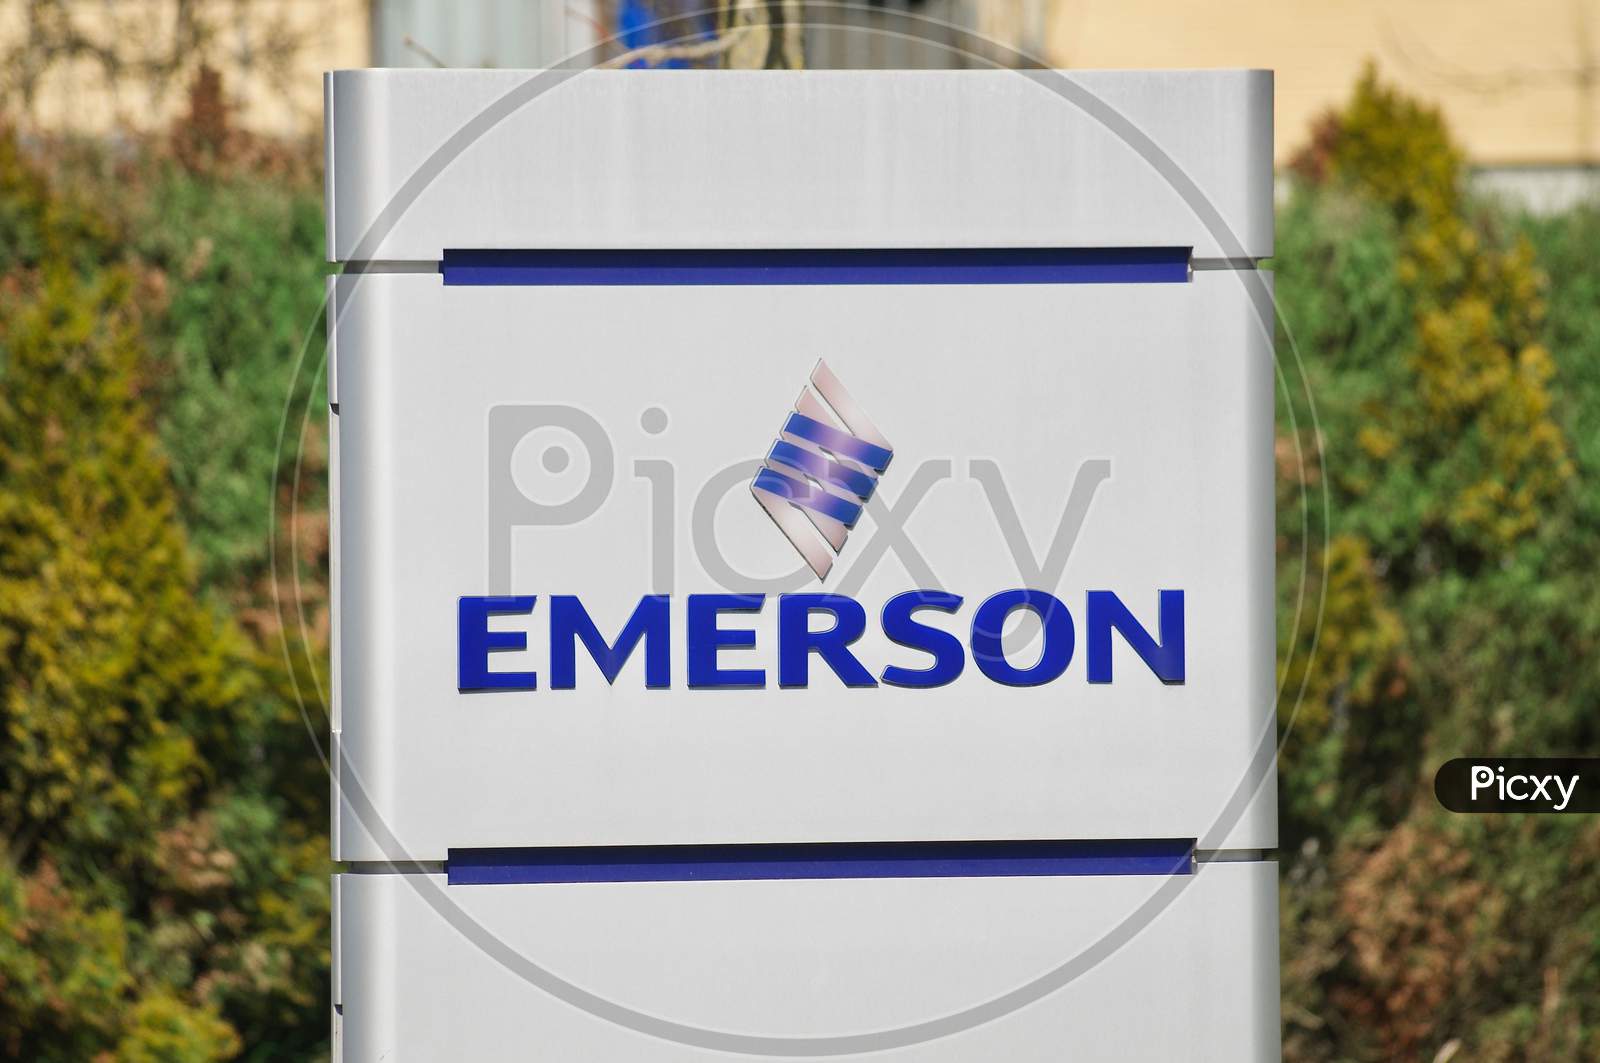 Emerson Electric Co. Sign At Office Building In Baar, Switzerland